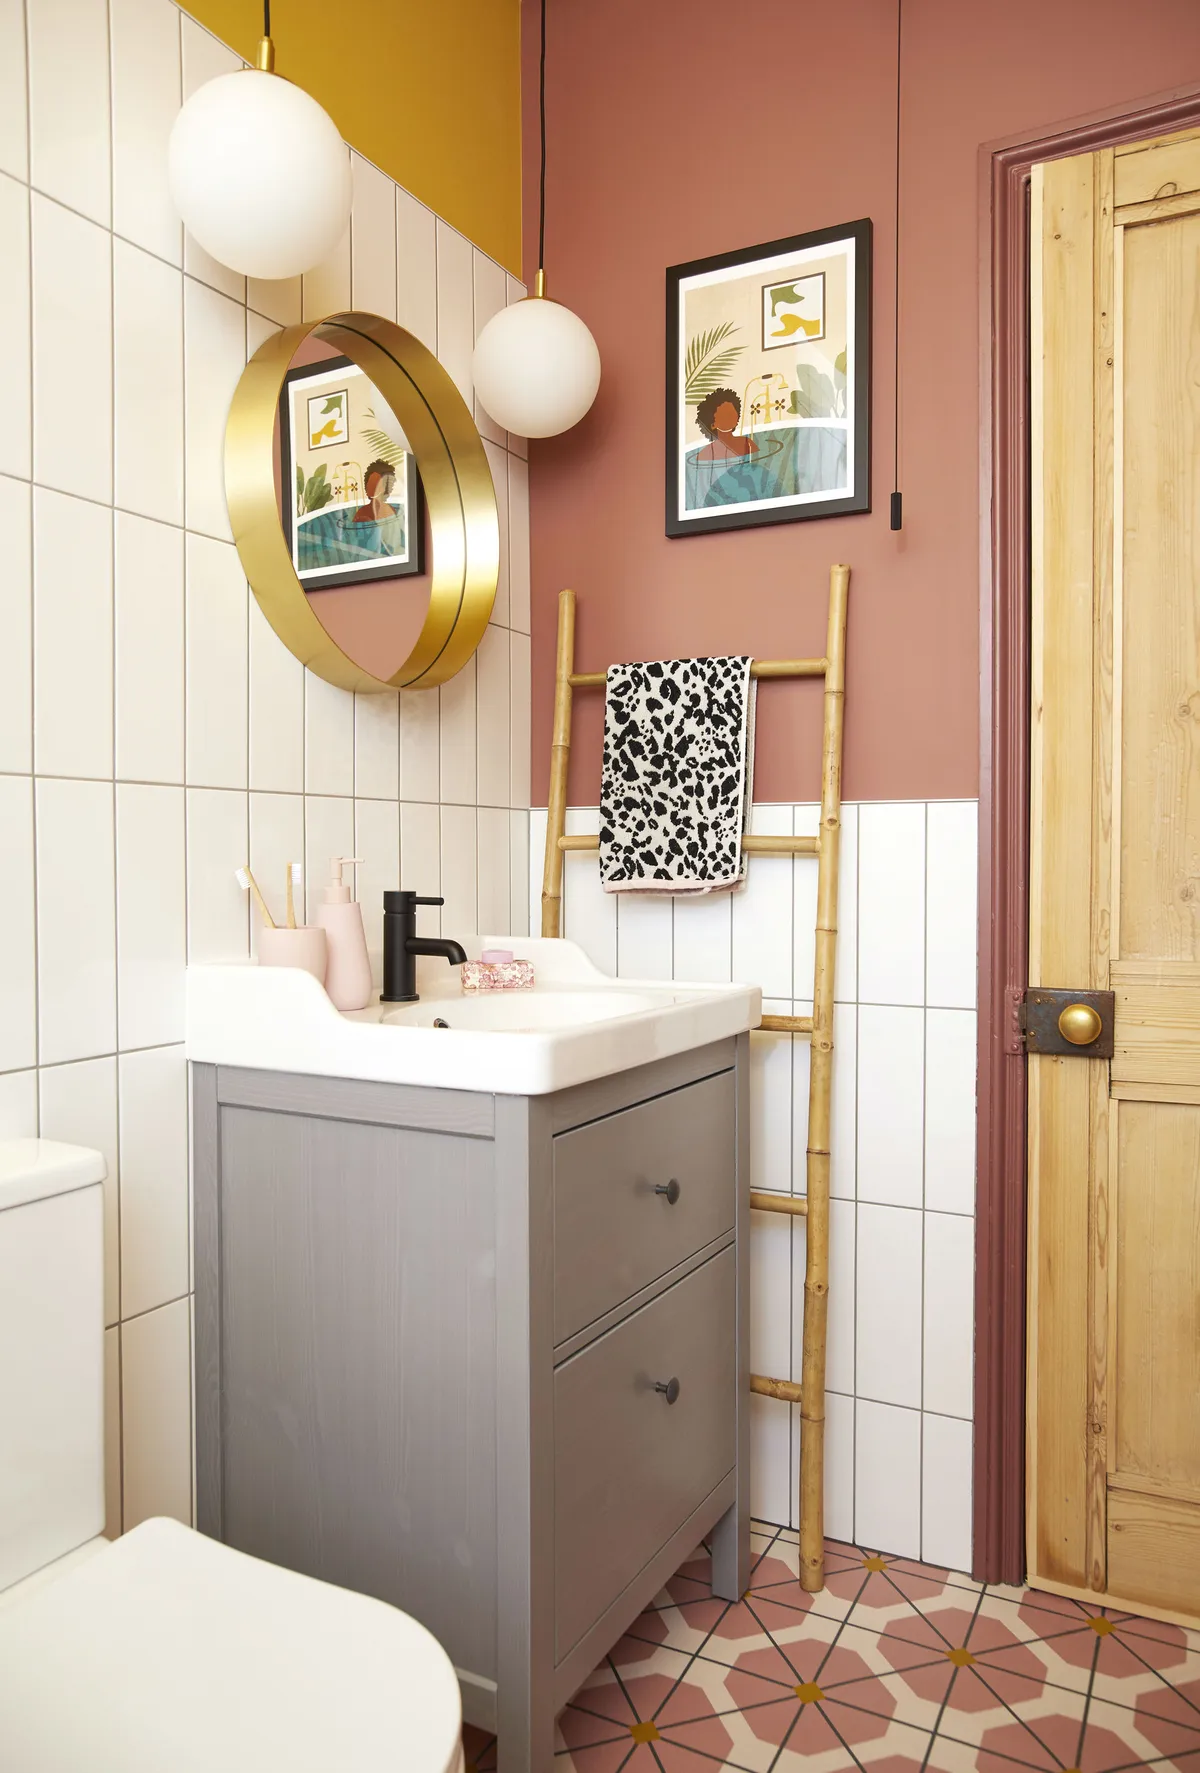 ‘We spent months researching the best cabinets as we needed decent storage for all our bathroom products; this one is perfect as it has plenty of surface space on the basin for toothbrushes and soap’